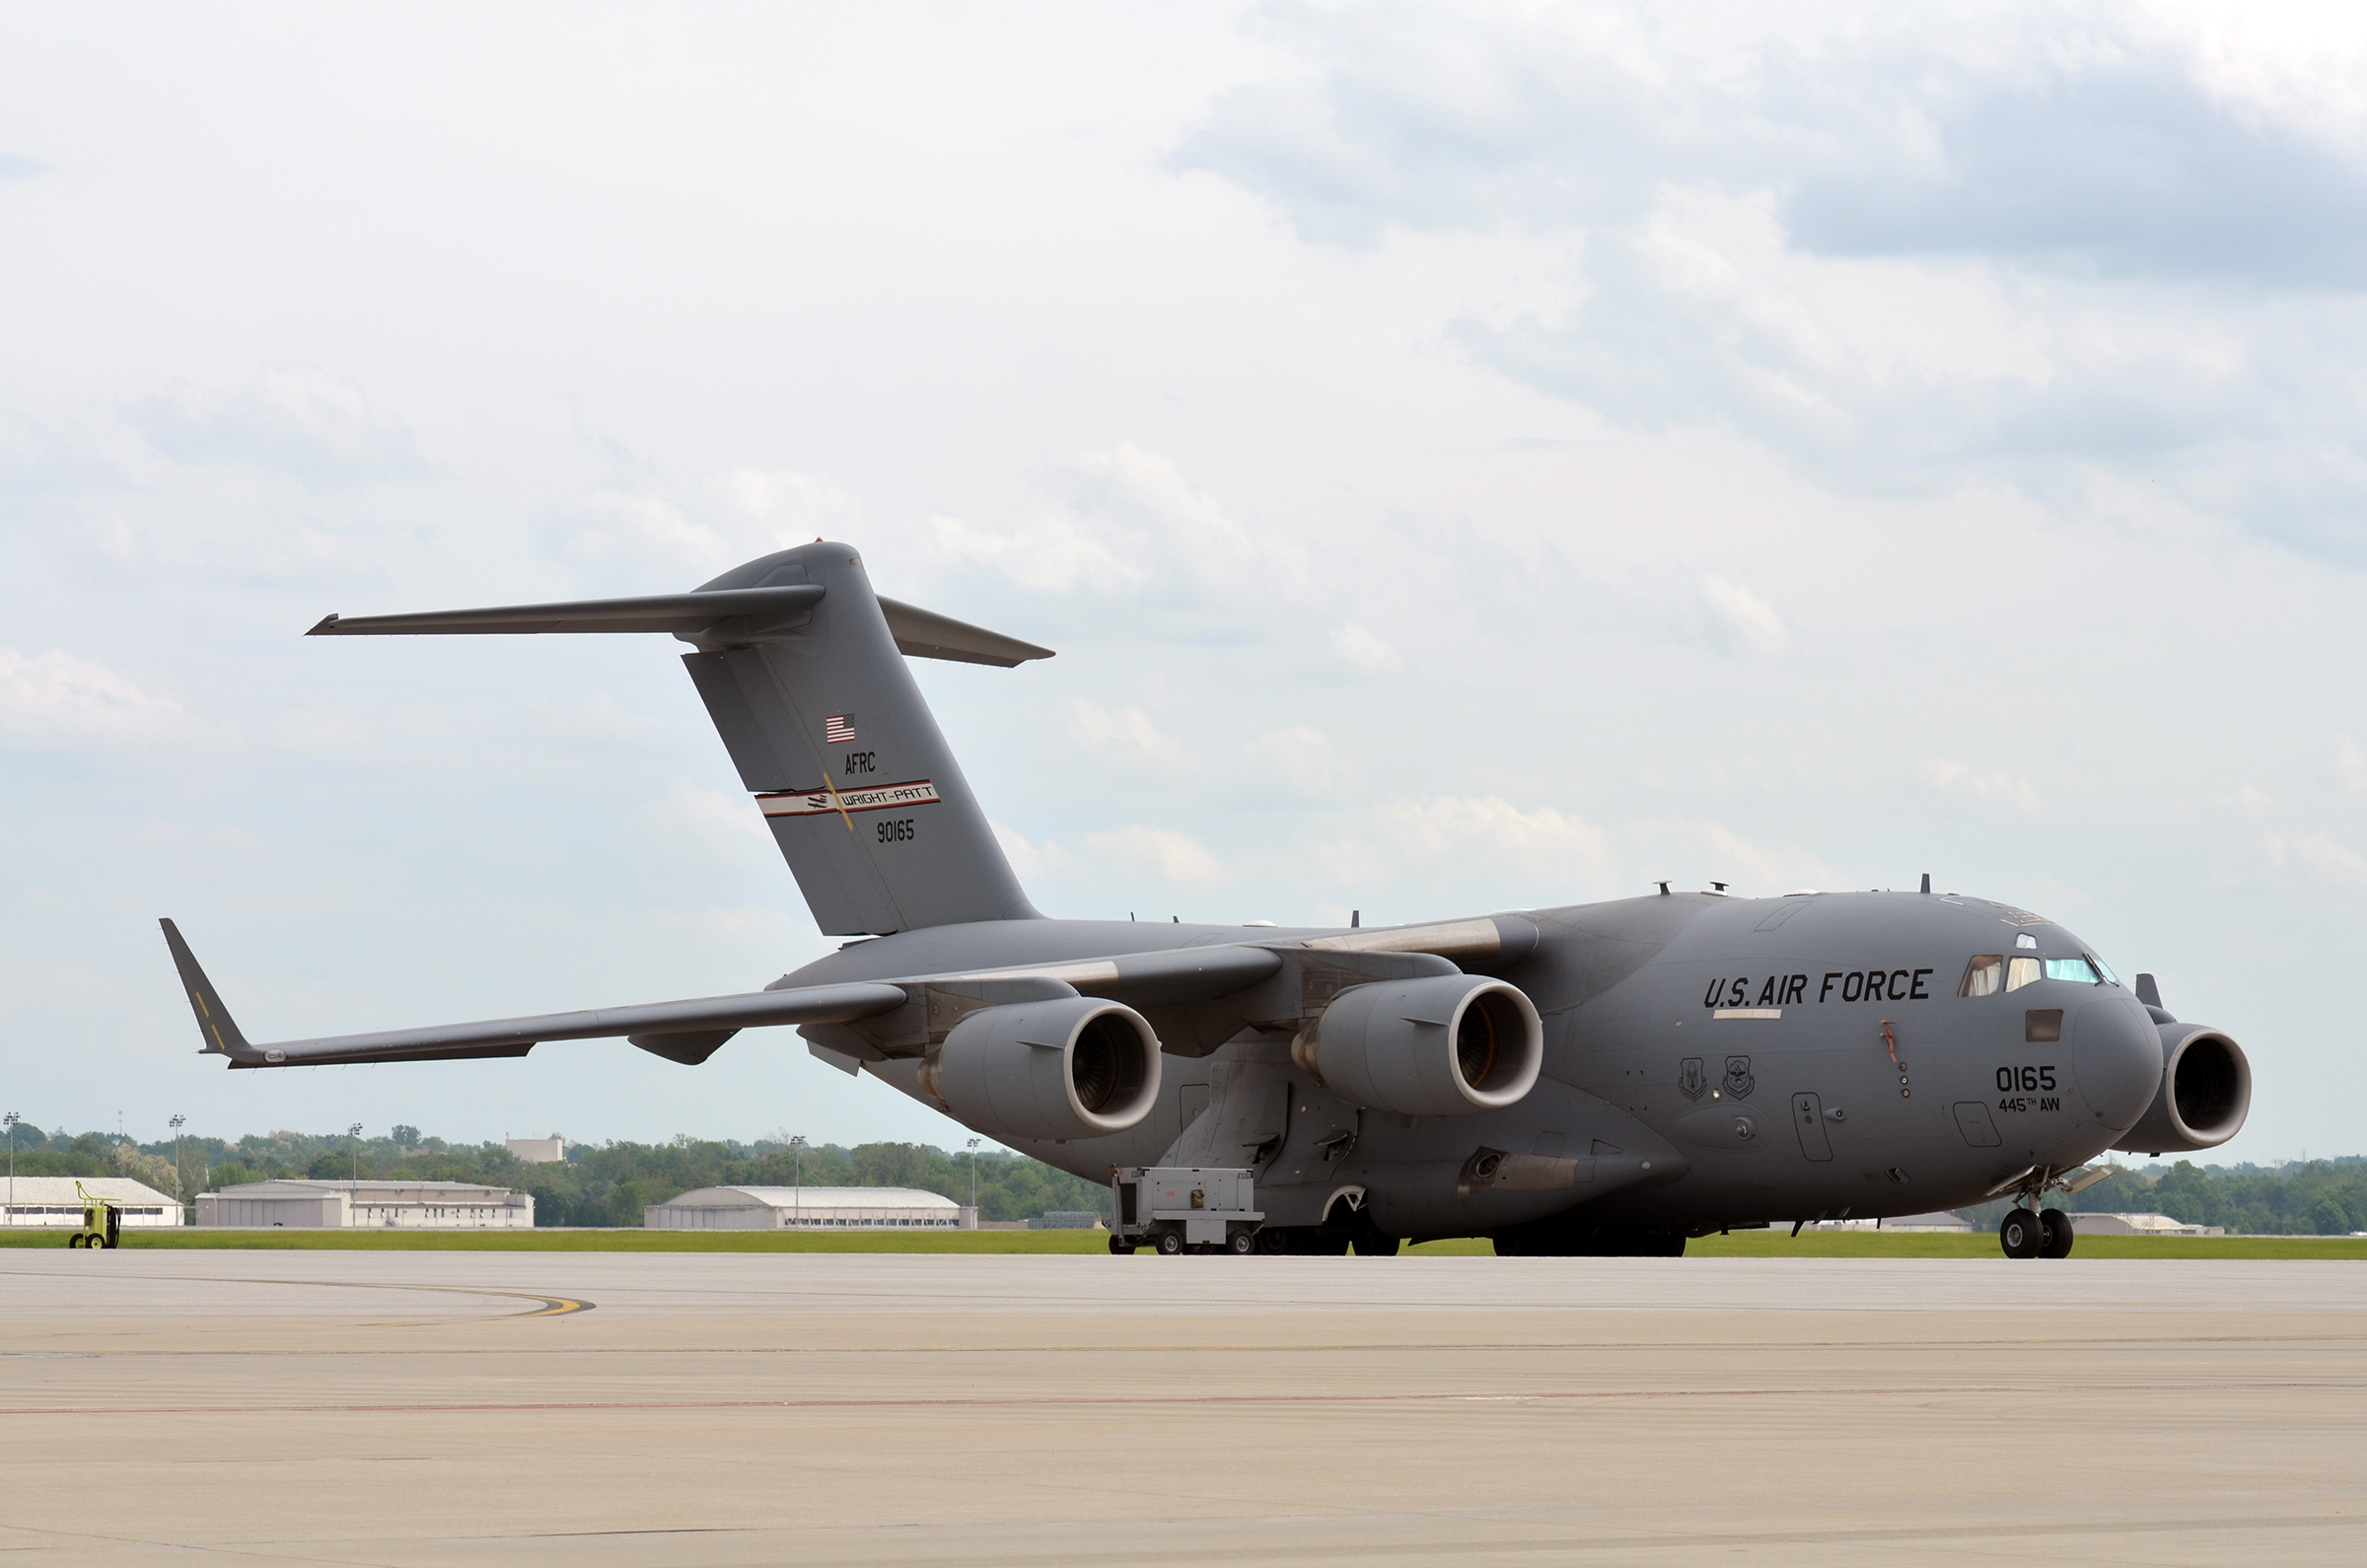 WRIGHT-PATTERSON AIR FORCE BASE, Ohio - A 445th Airlift Wing C-17 Globemaster III experienced an engine malfunction causing a rare tail pipe fire Jan. 7, 2015. The wing currently has nine C-17 Globemaster III aircraft. (U.S. Air Force photo/Staff Sgt. Mikhail Berlin)